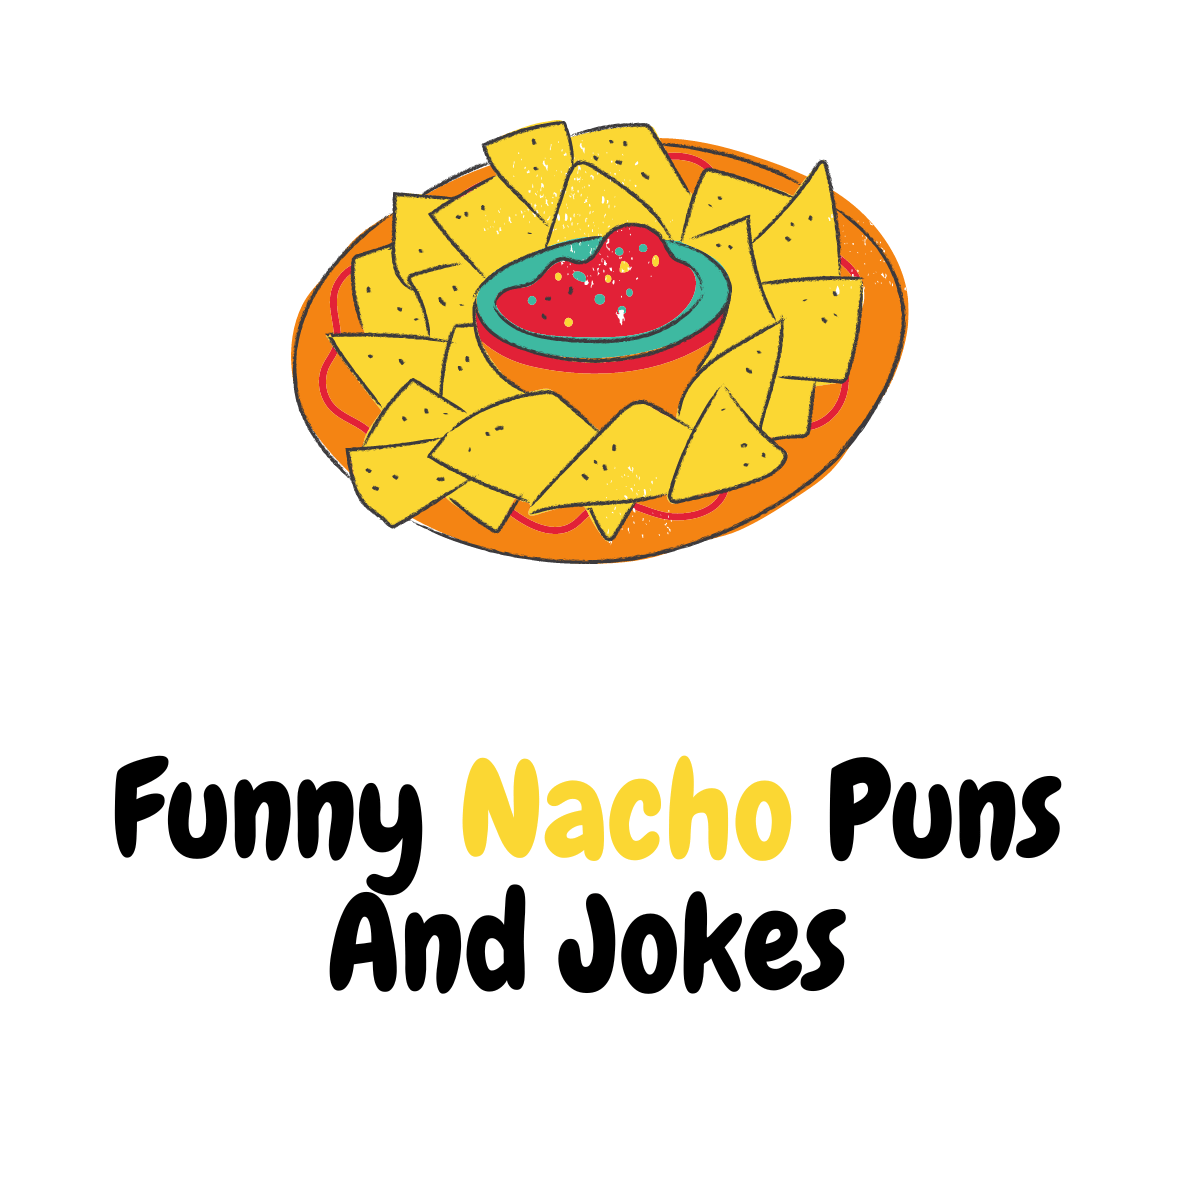 130+ Funny Nacho Puns And Jokes: Spice up Your Day